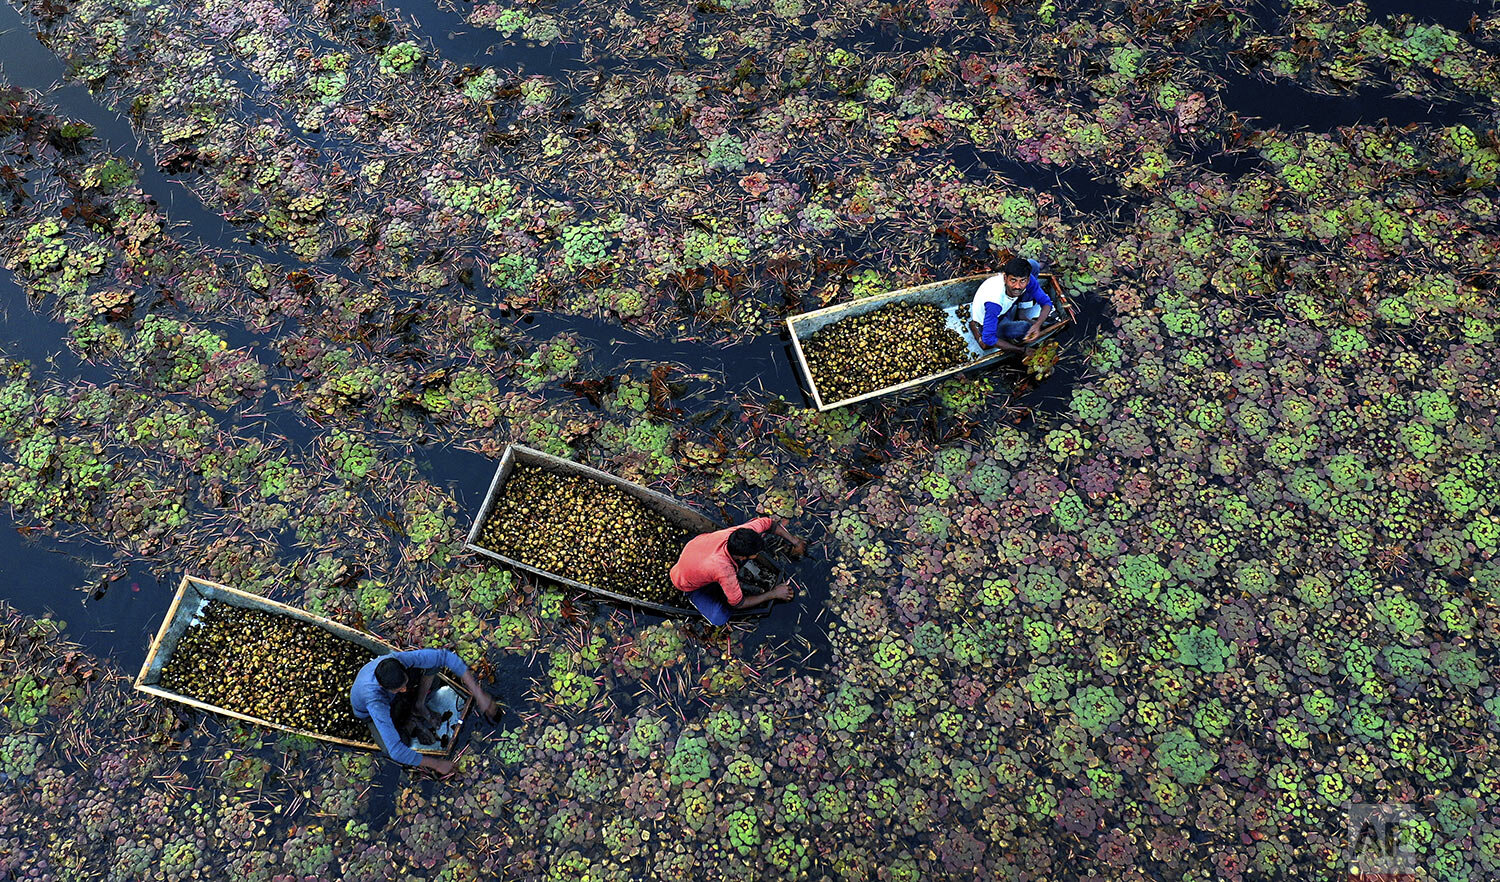  Villagers pluck water chestnuts from a pond in Kanpur, Uttar Pradesh state, India, Wednesday, Dec. 4, 2019. (AP Photo/Rajesh Kumar Singh) 